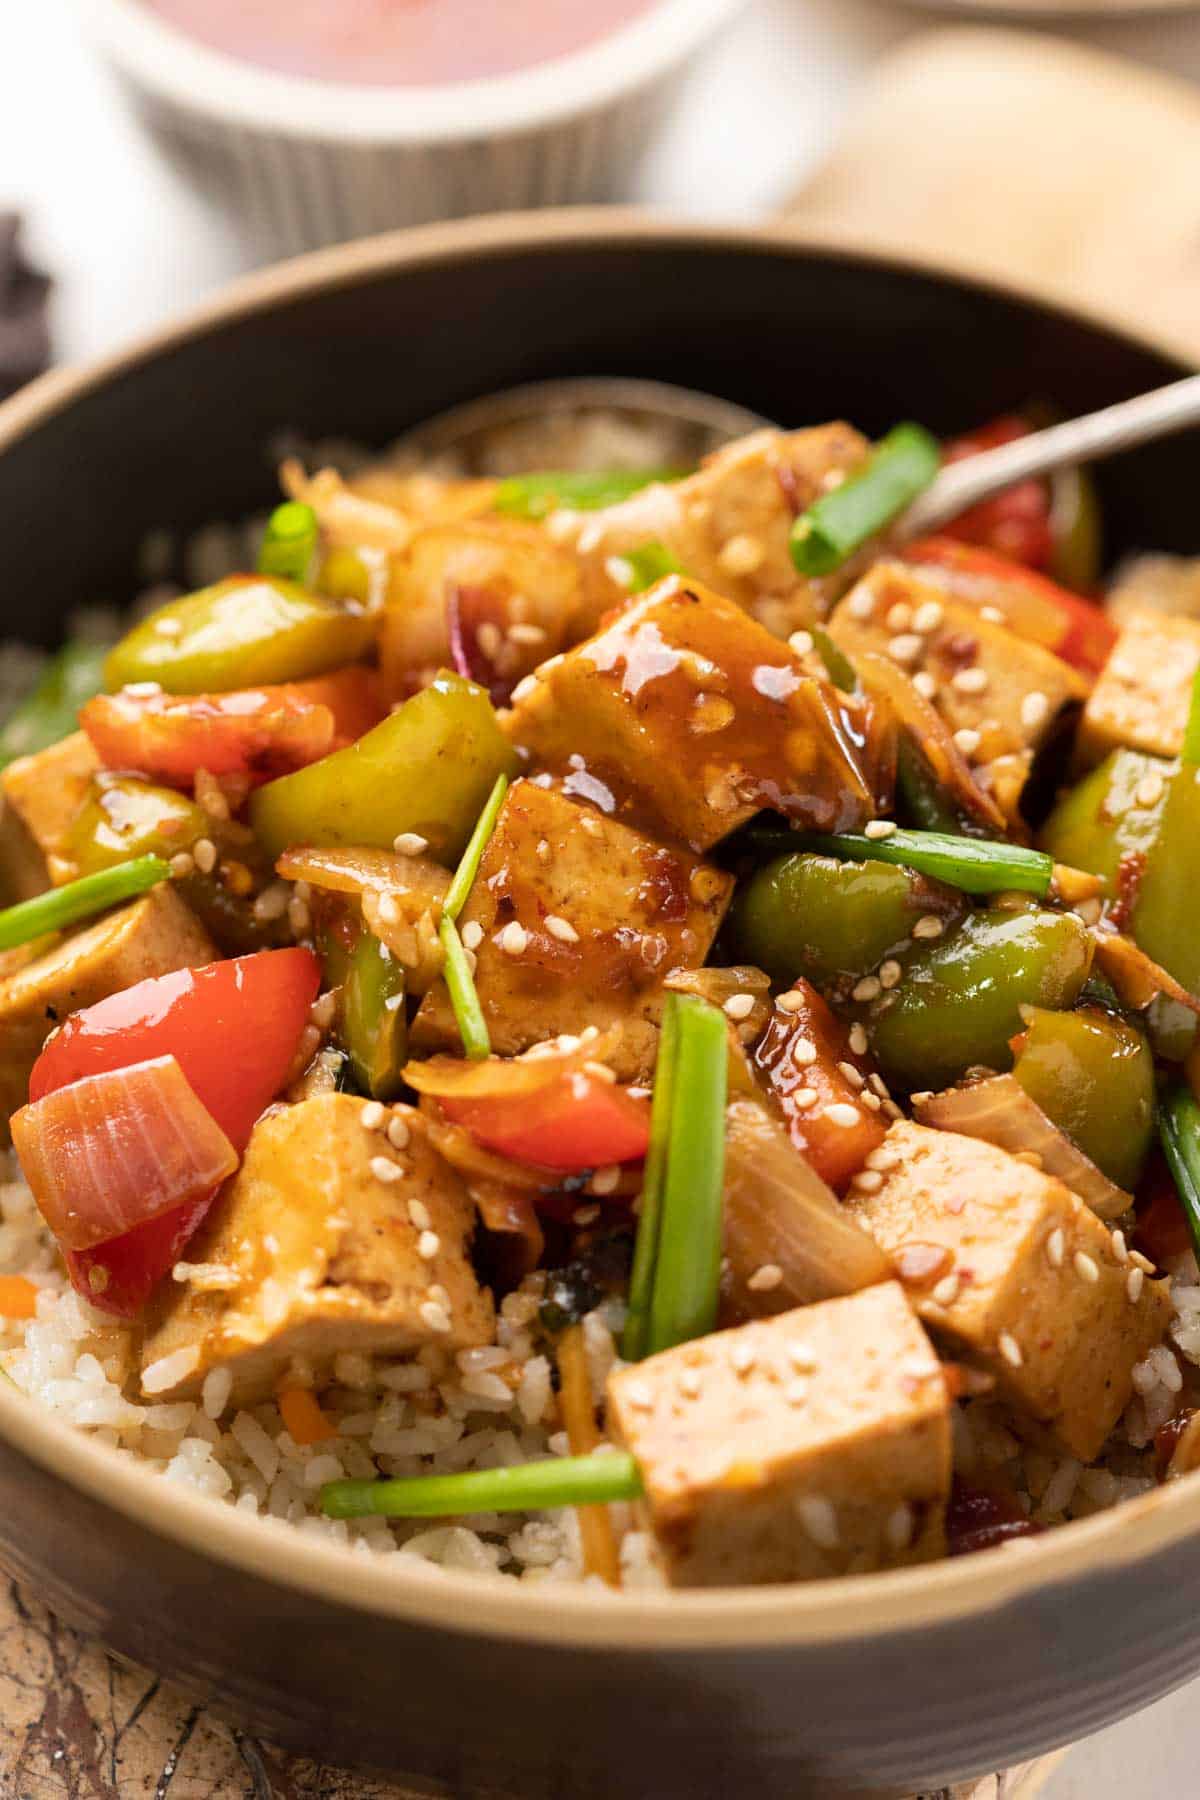 Sweet Chili Tofu Stir Fry served over rice in a bowl.